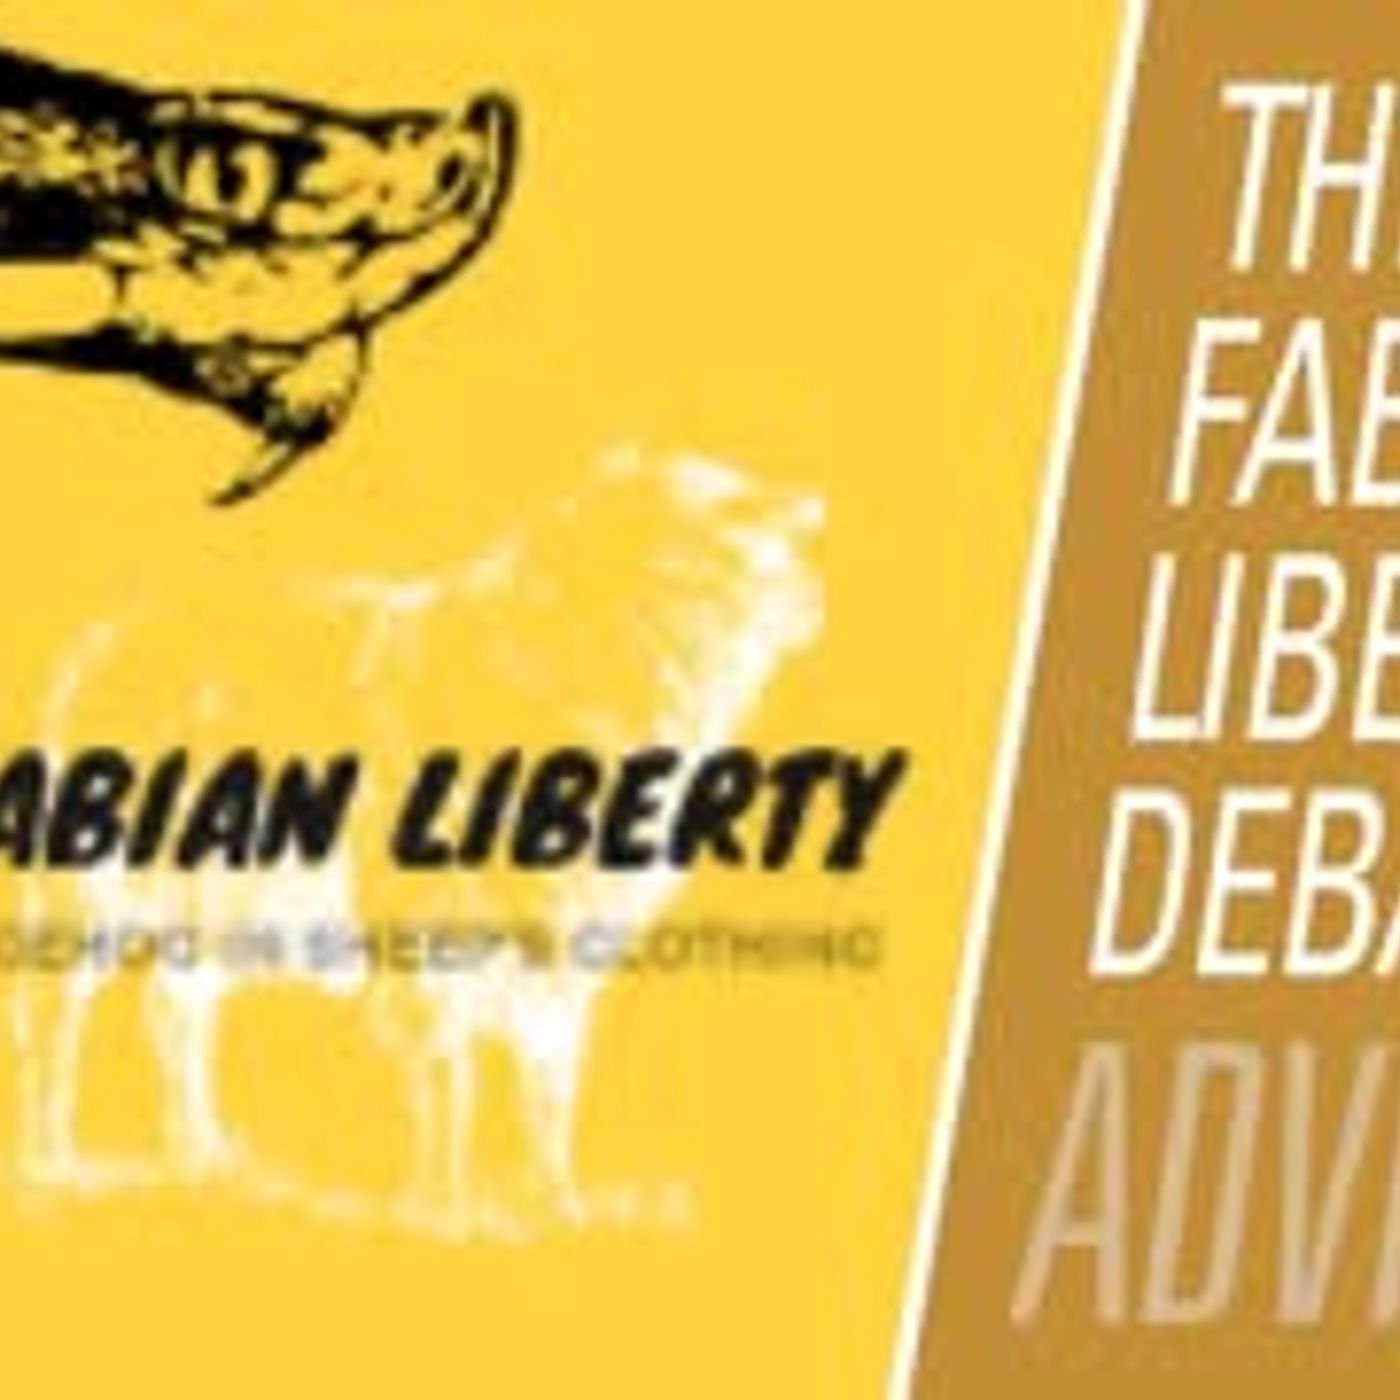 Feminism is just like men's rights! Debating with FabianLiberty | Fireside Chat 244